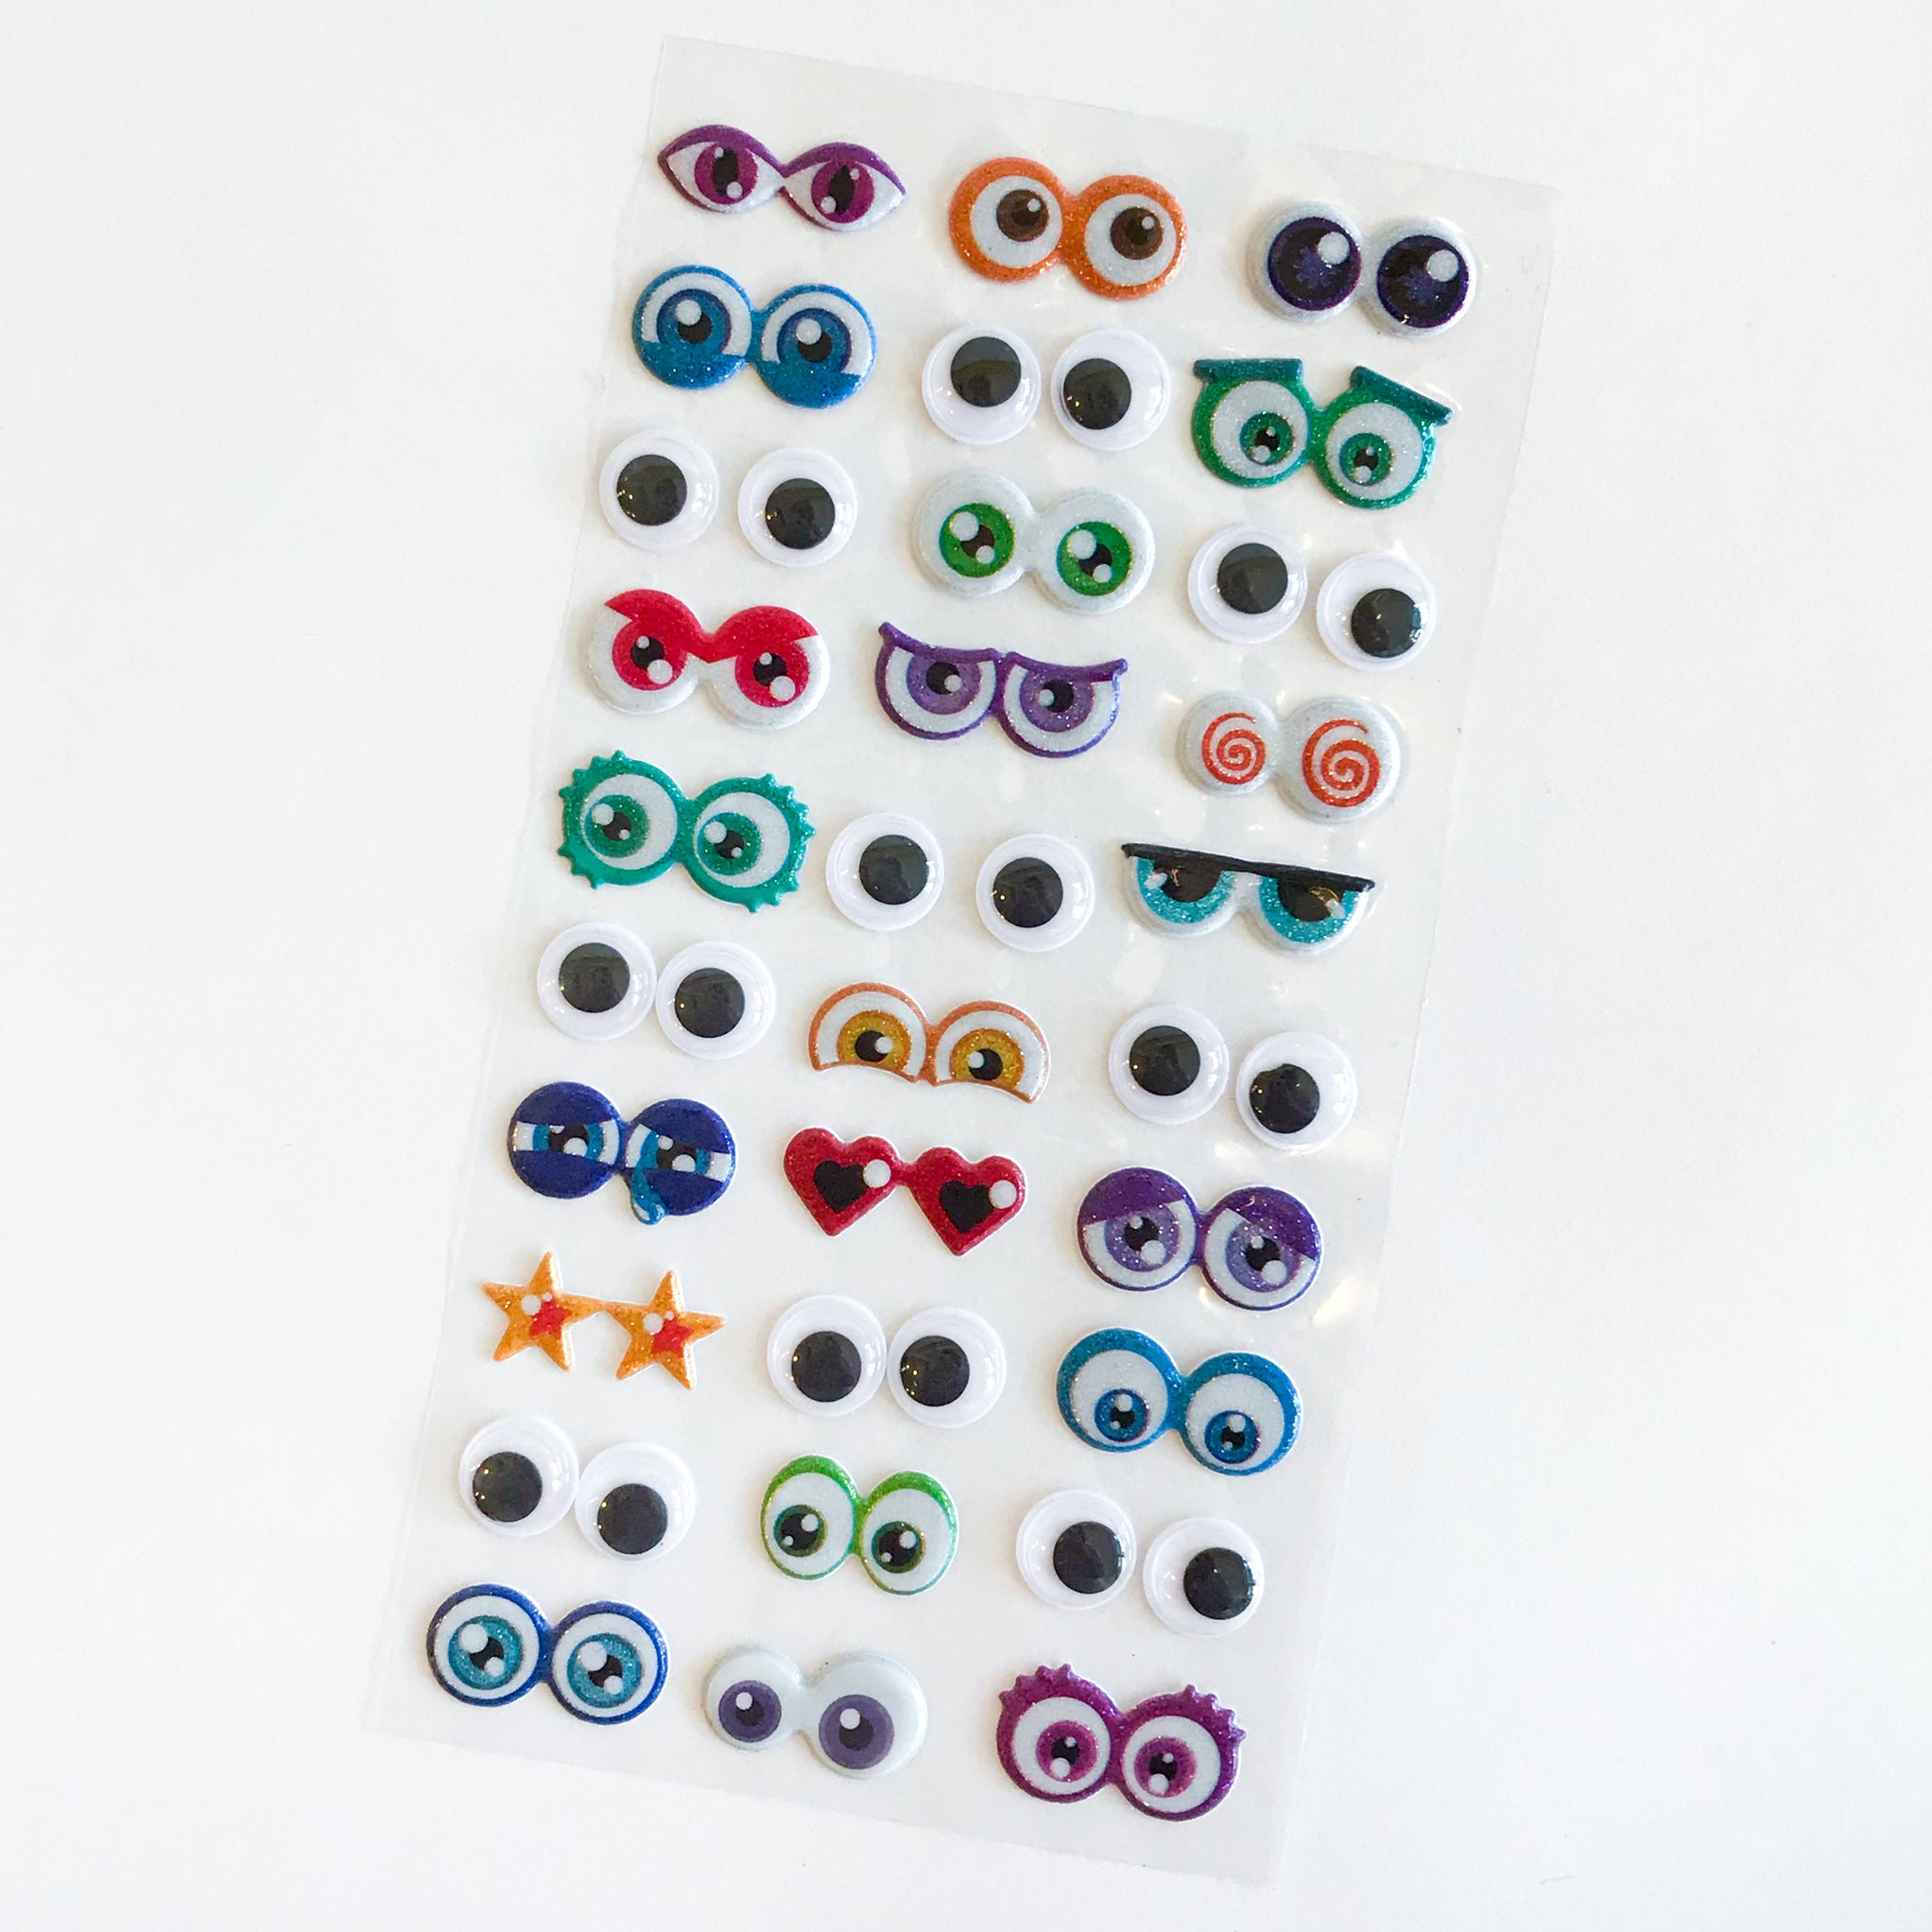 Animated Googly Eyes Self Adhesive Stickers Collage Collage